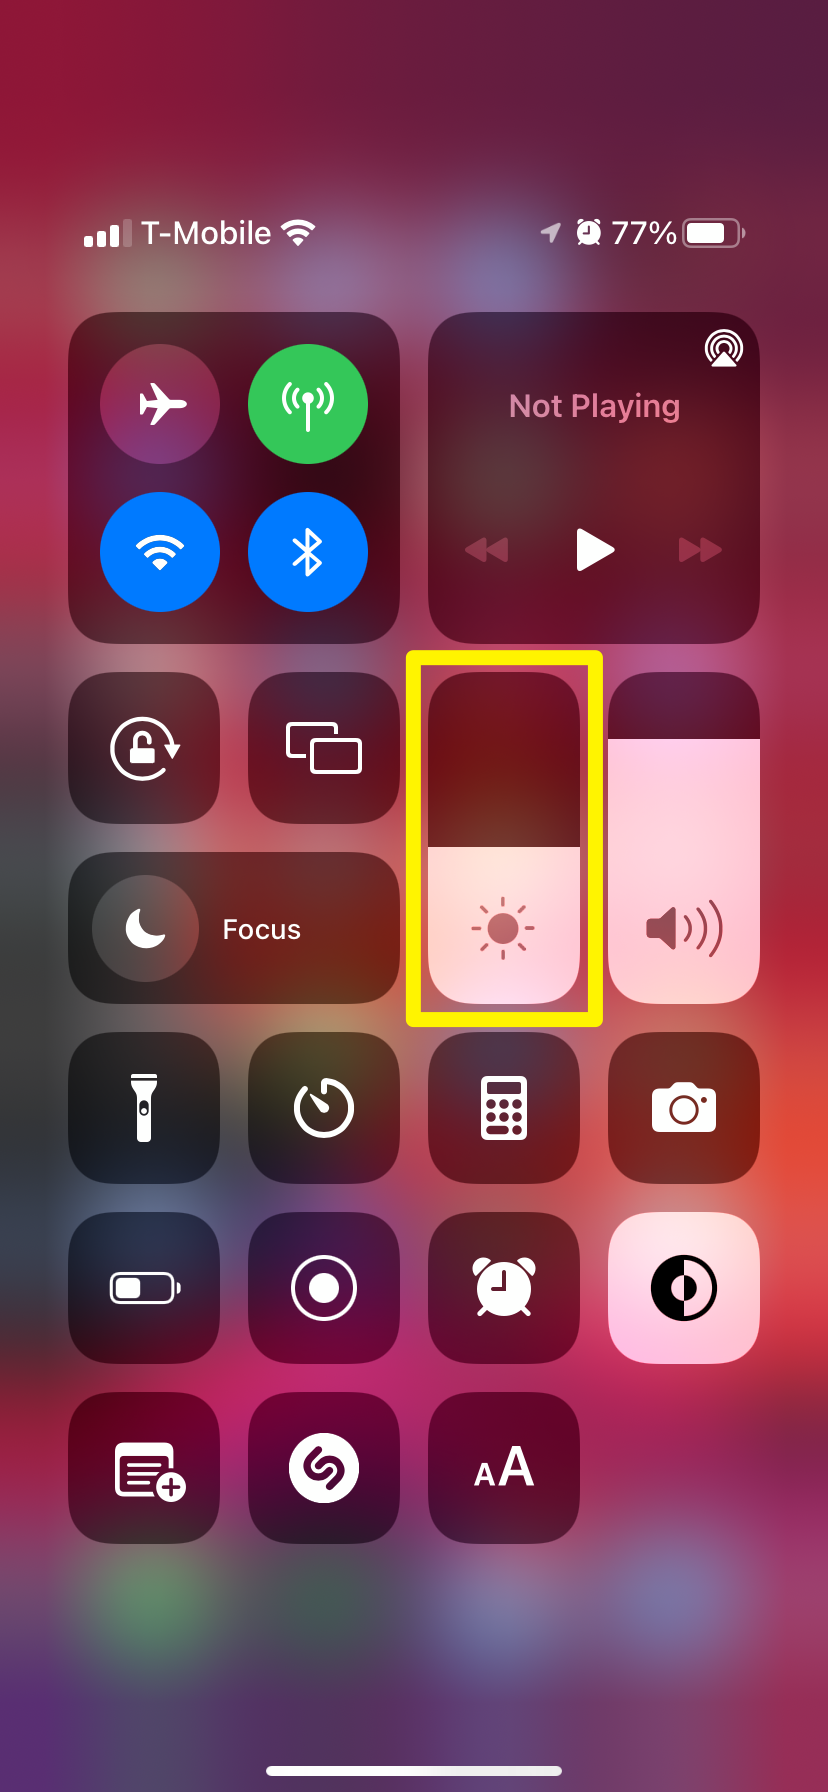 The Control Center on an iPhone. The brightness meter is highlighted.